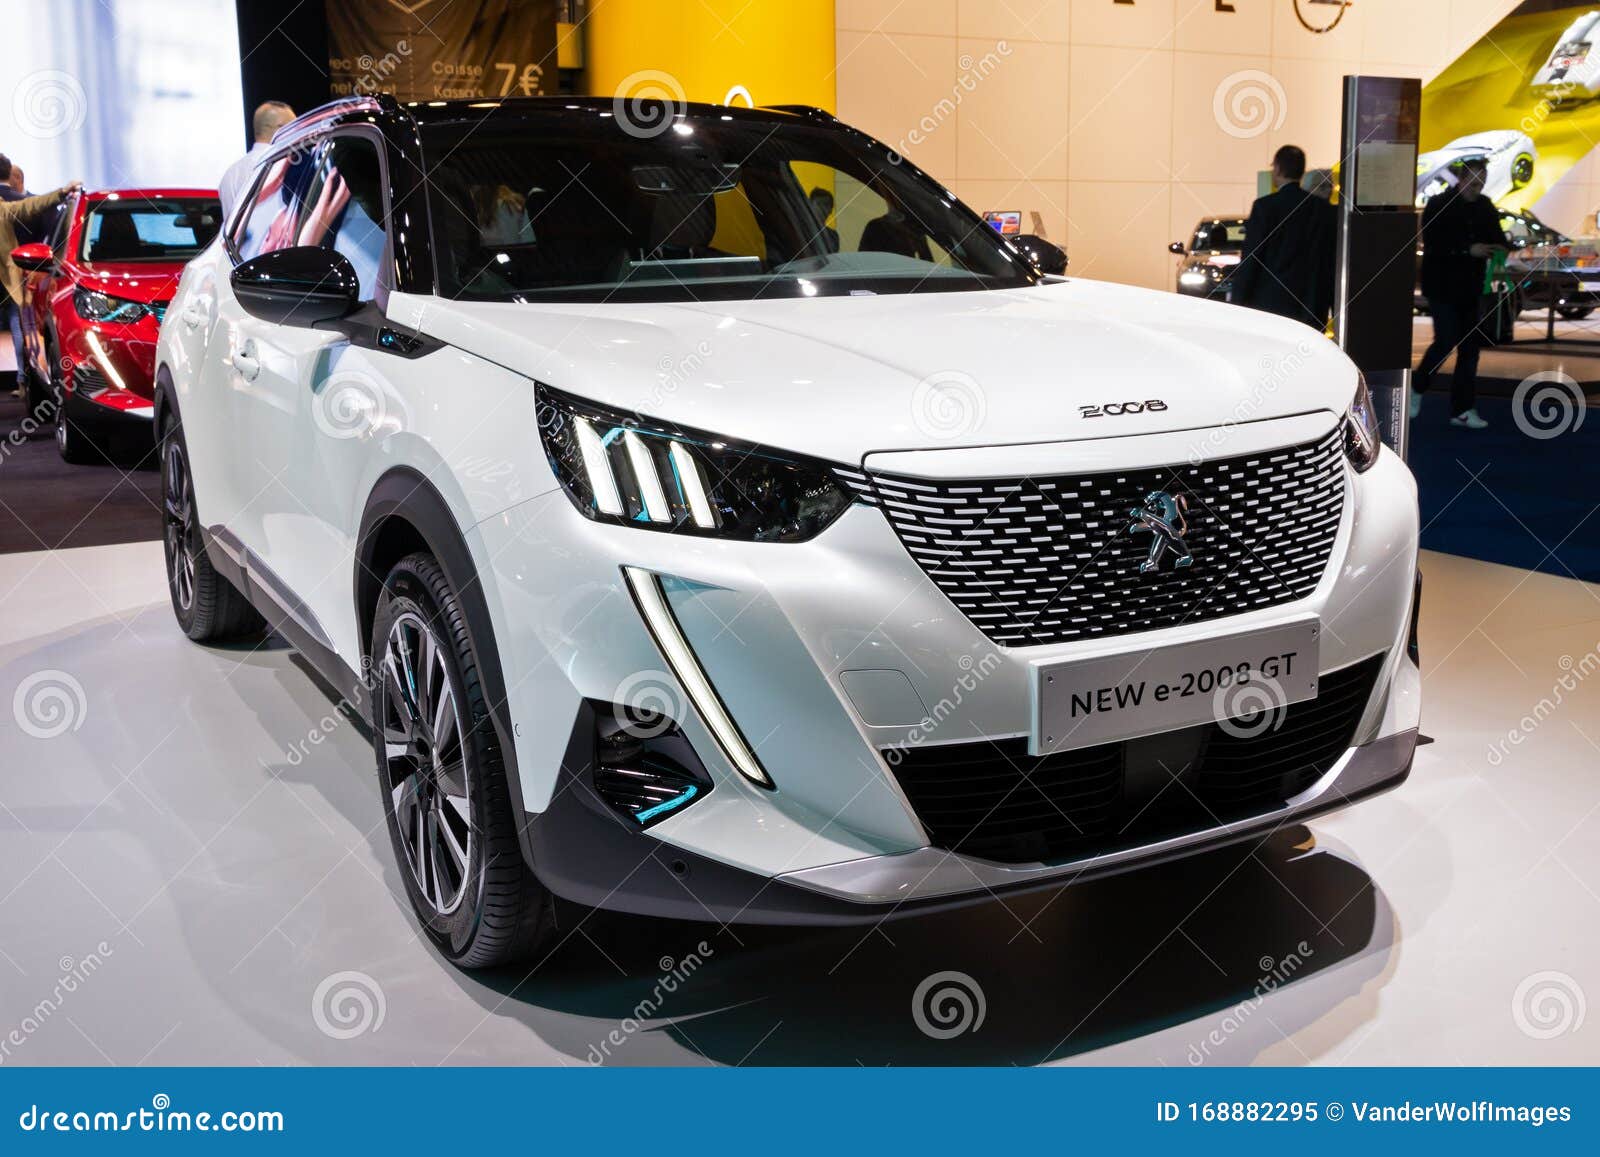 2020 Peugeot E 2008 Gt Electric Suv Car Editorial Image Image Of